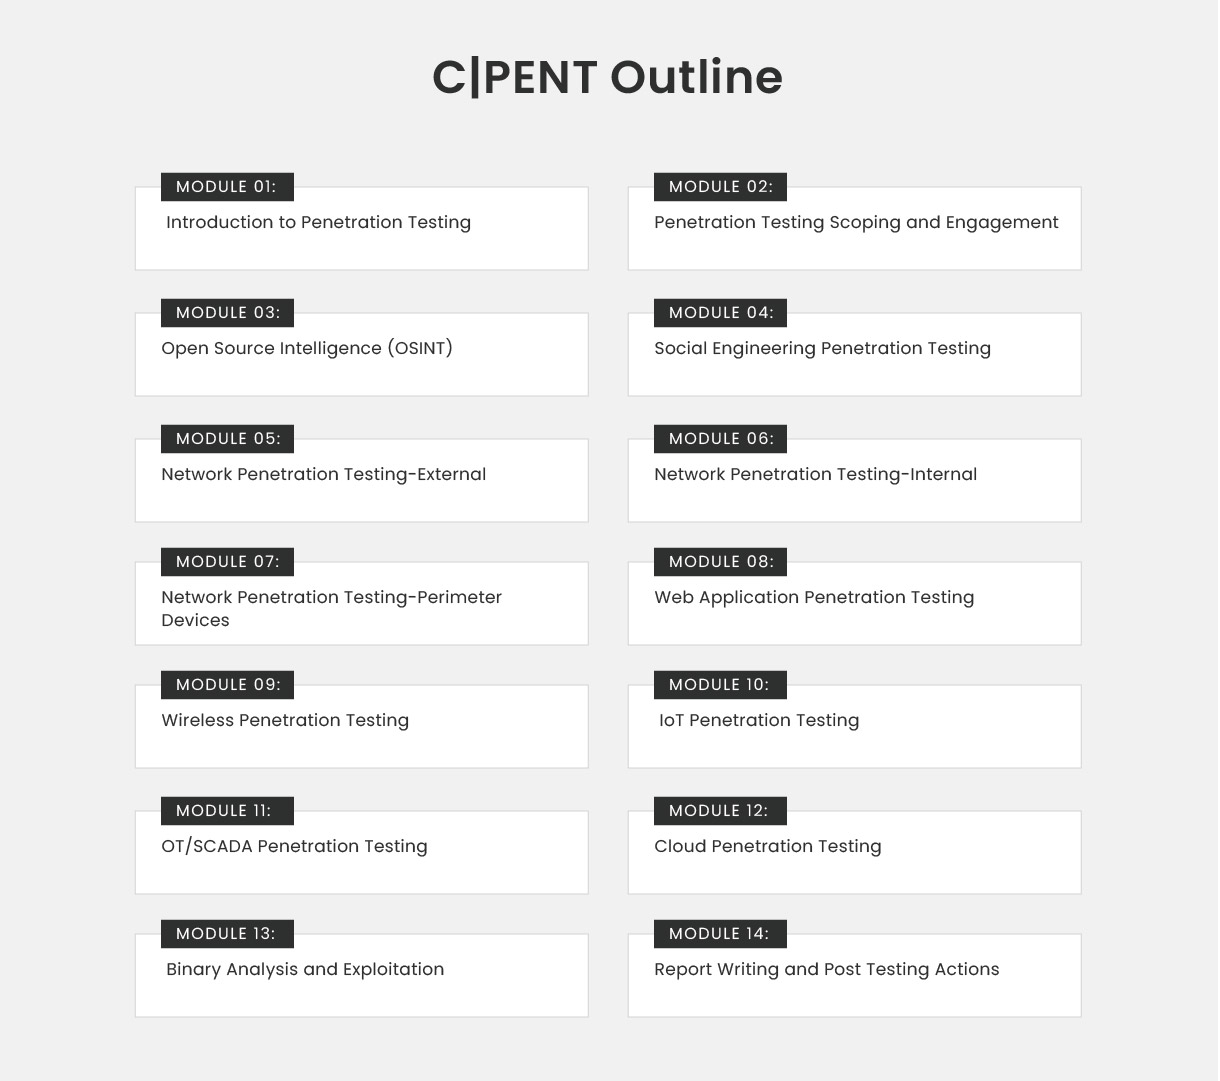 CPENT outline